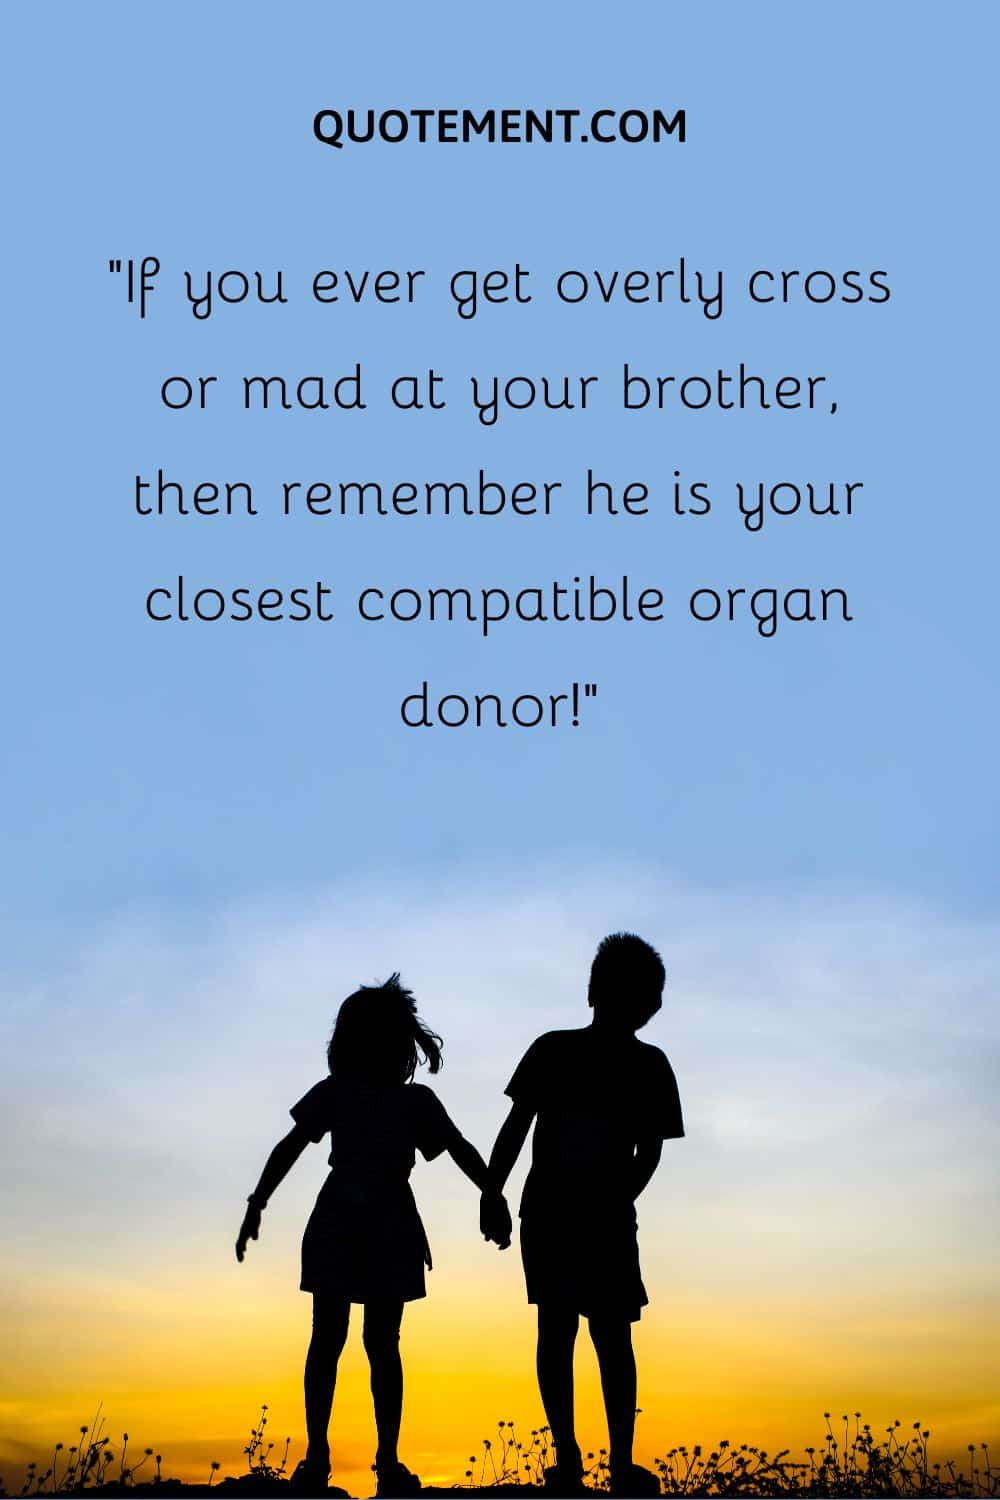 “If you ever get overly cross or mad at your brother, then remember he is your closest compatible organ donor!”